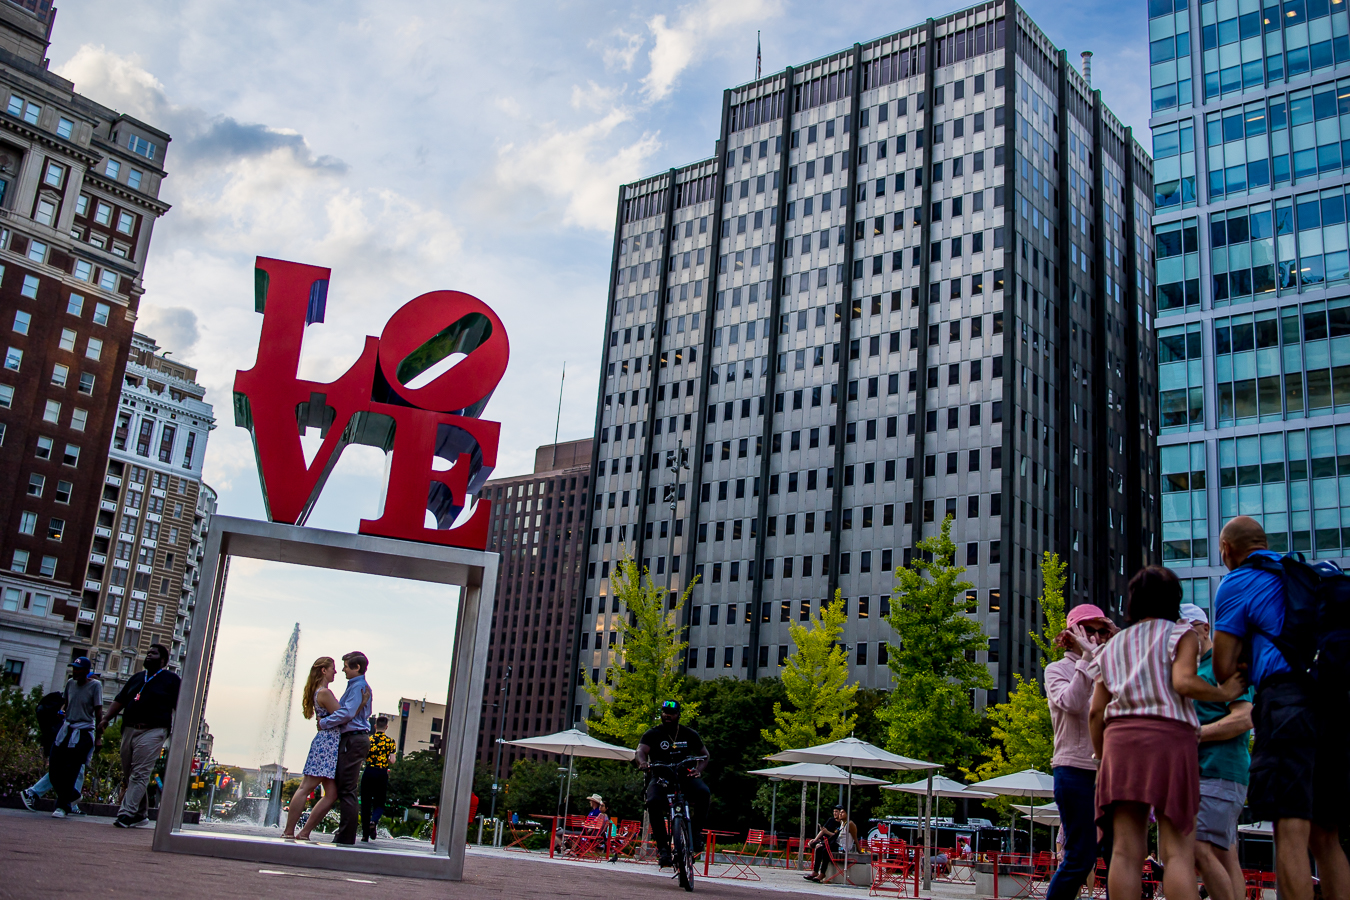 Creative Photojournalistic Philadelphia Wedding Photographer, rhinehart photography, captures this image of the couple as they stand together underneath the famous love sign in center city Philadelphia while the city buzzes with action around them 